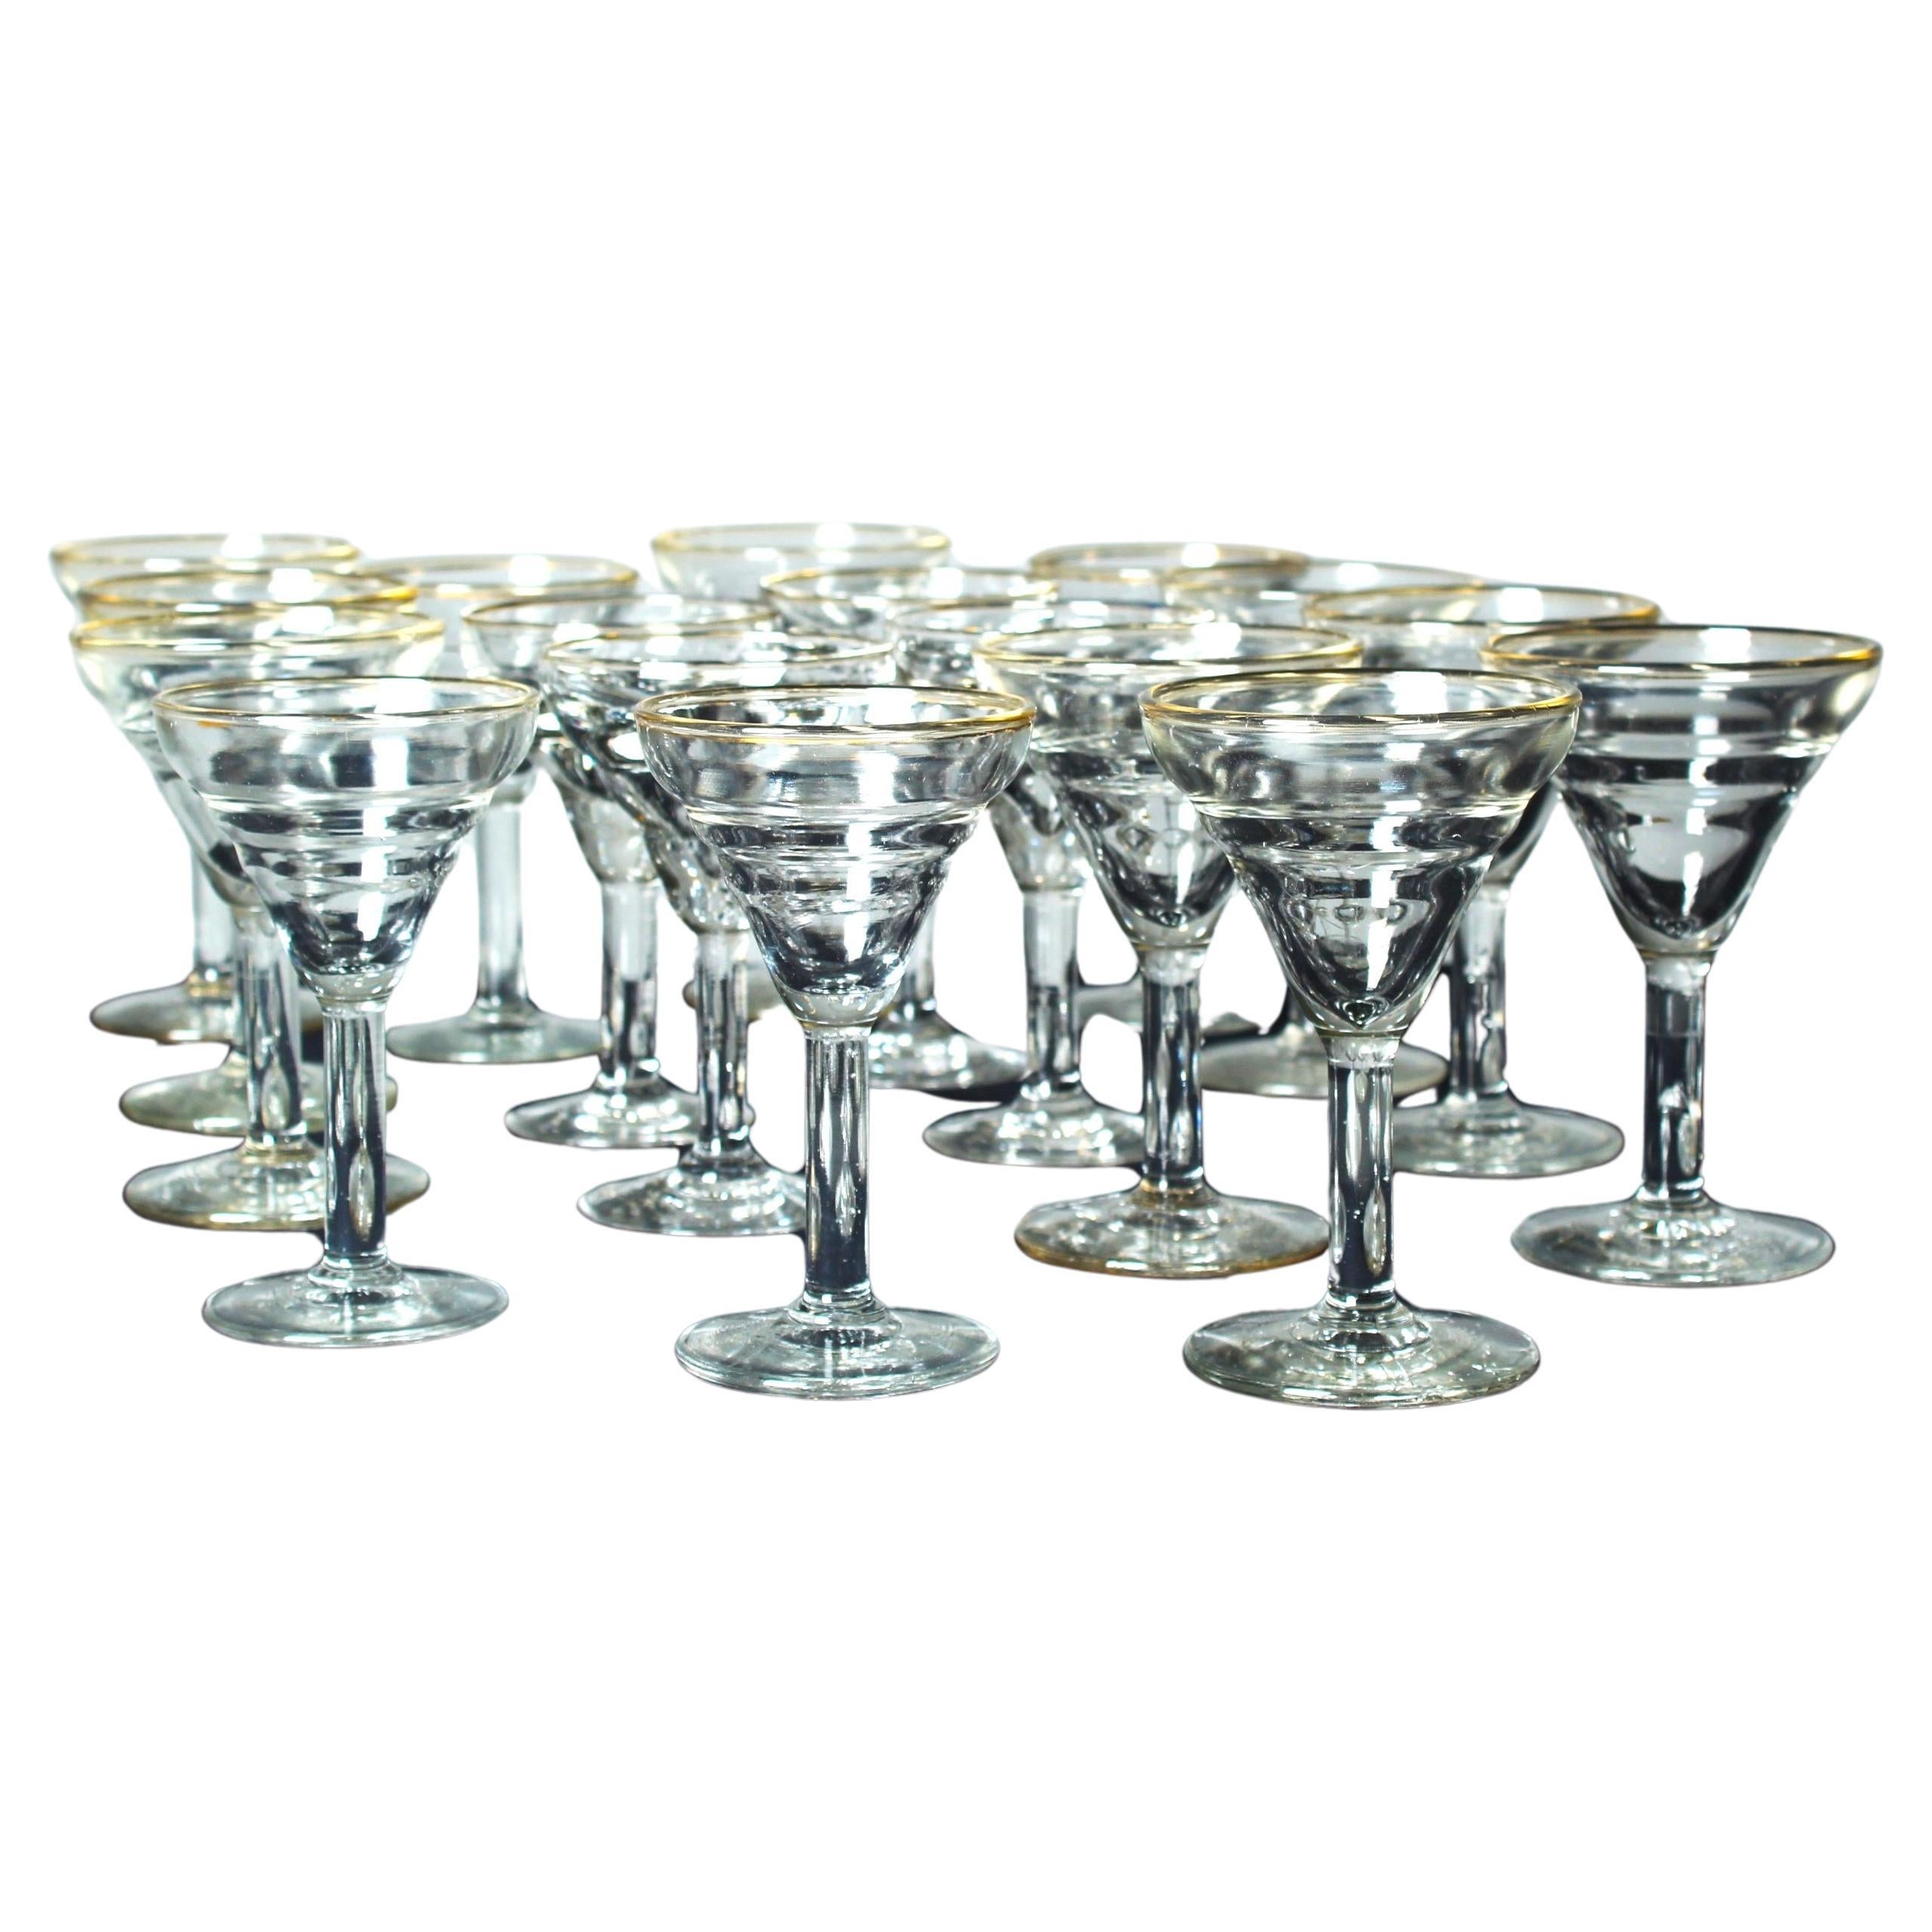 17 Art Nouveau Aperitif Glasses, 1900s, France, Crystal Glass With Gold Decor For Sale